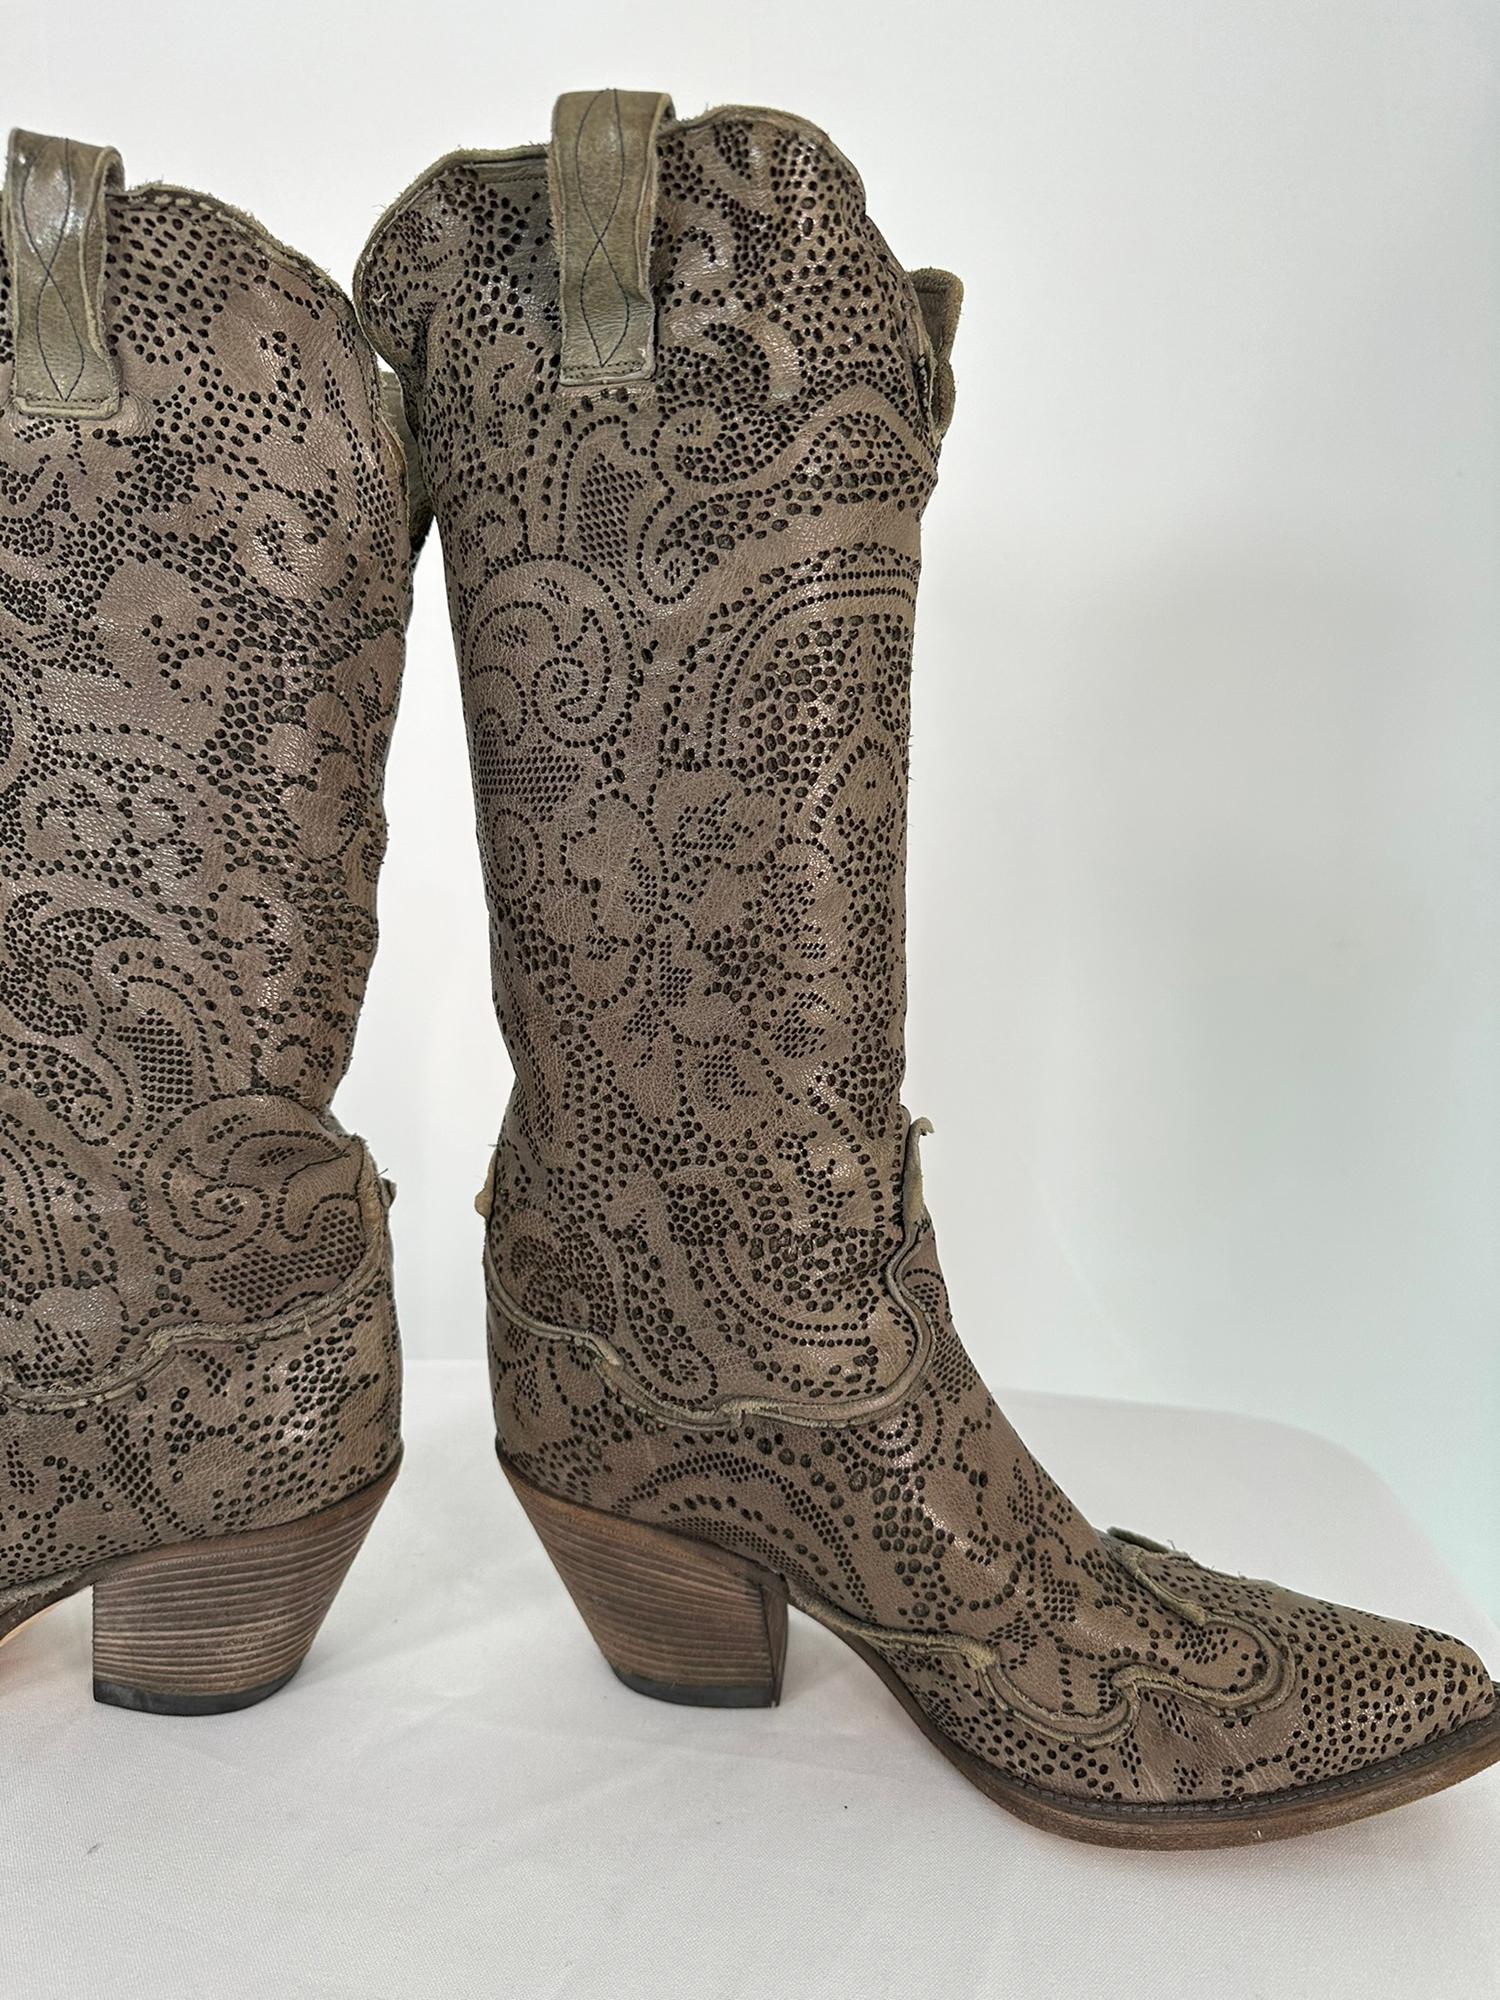 Nando Mucci Grey Floral Lacy Leather Laser Cut Cowboy Boots 39 For Sale 1